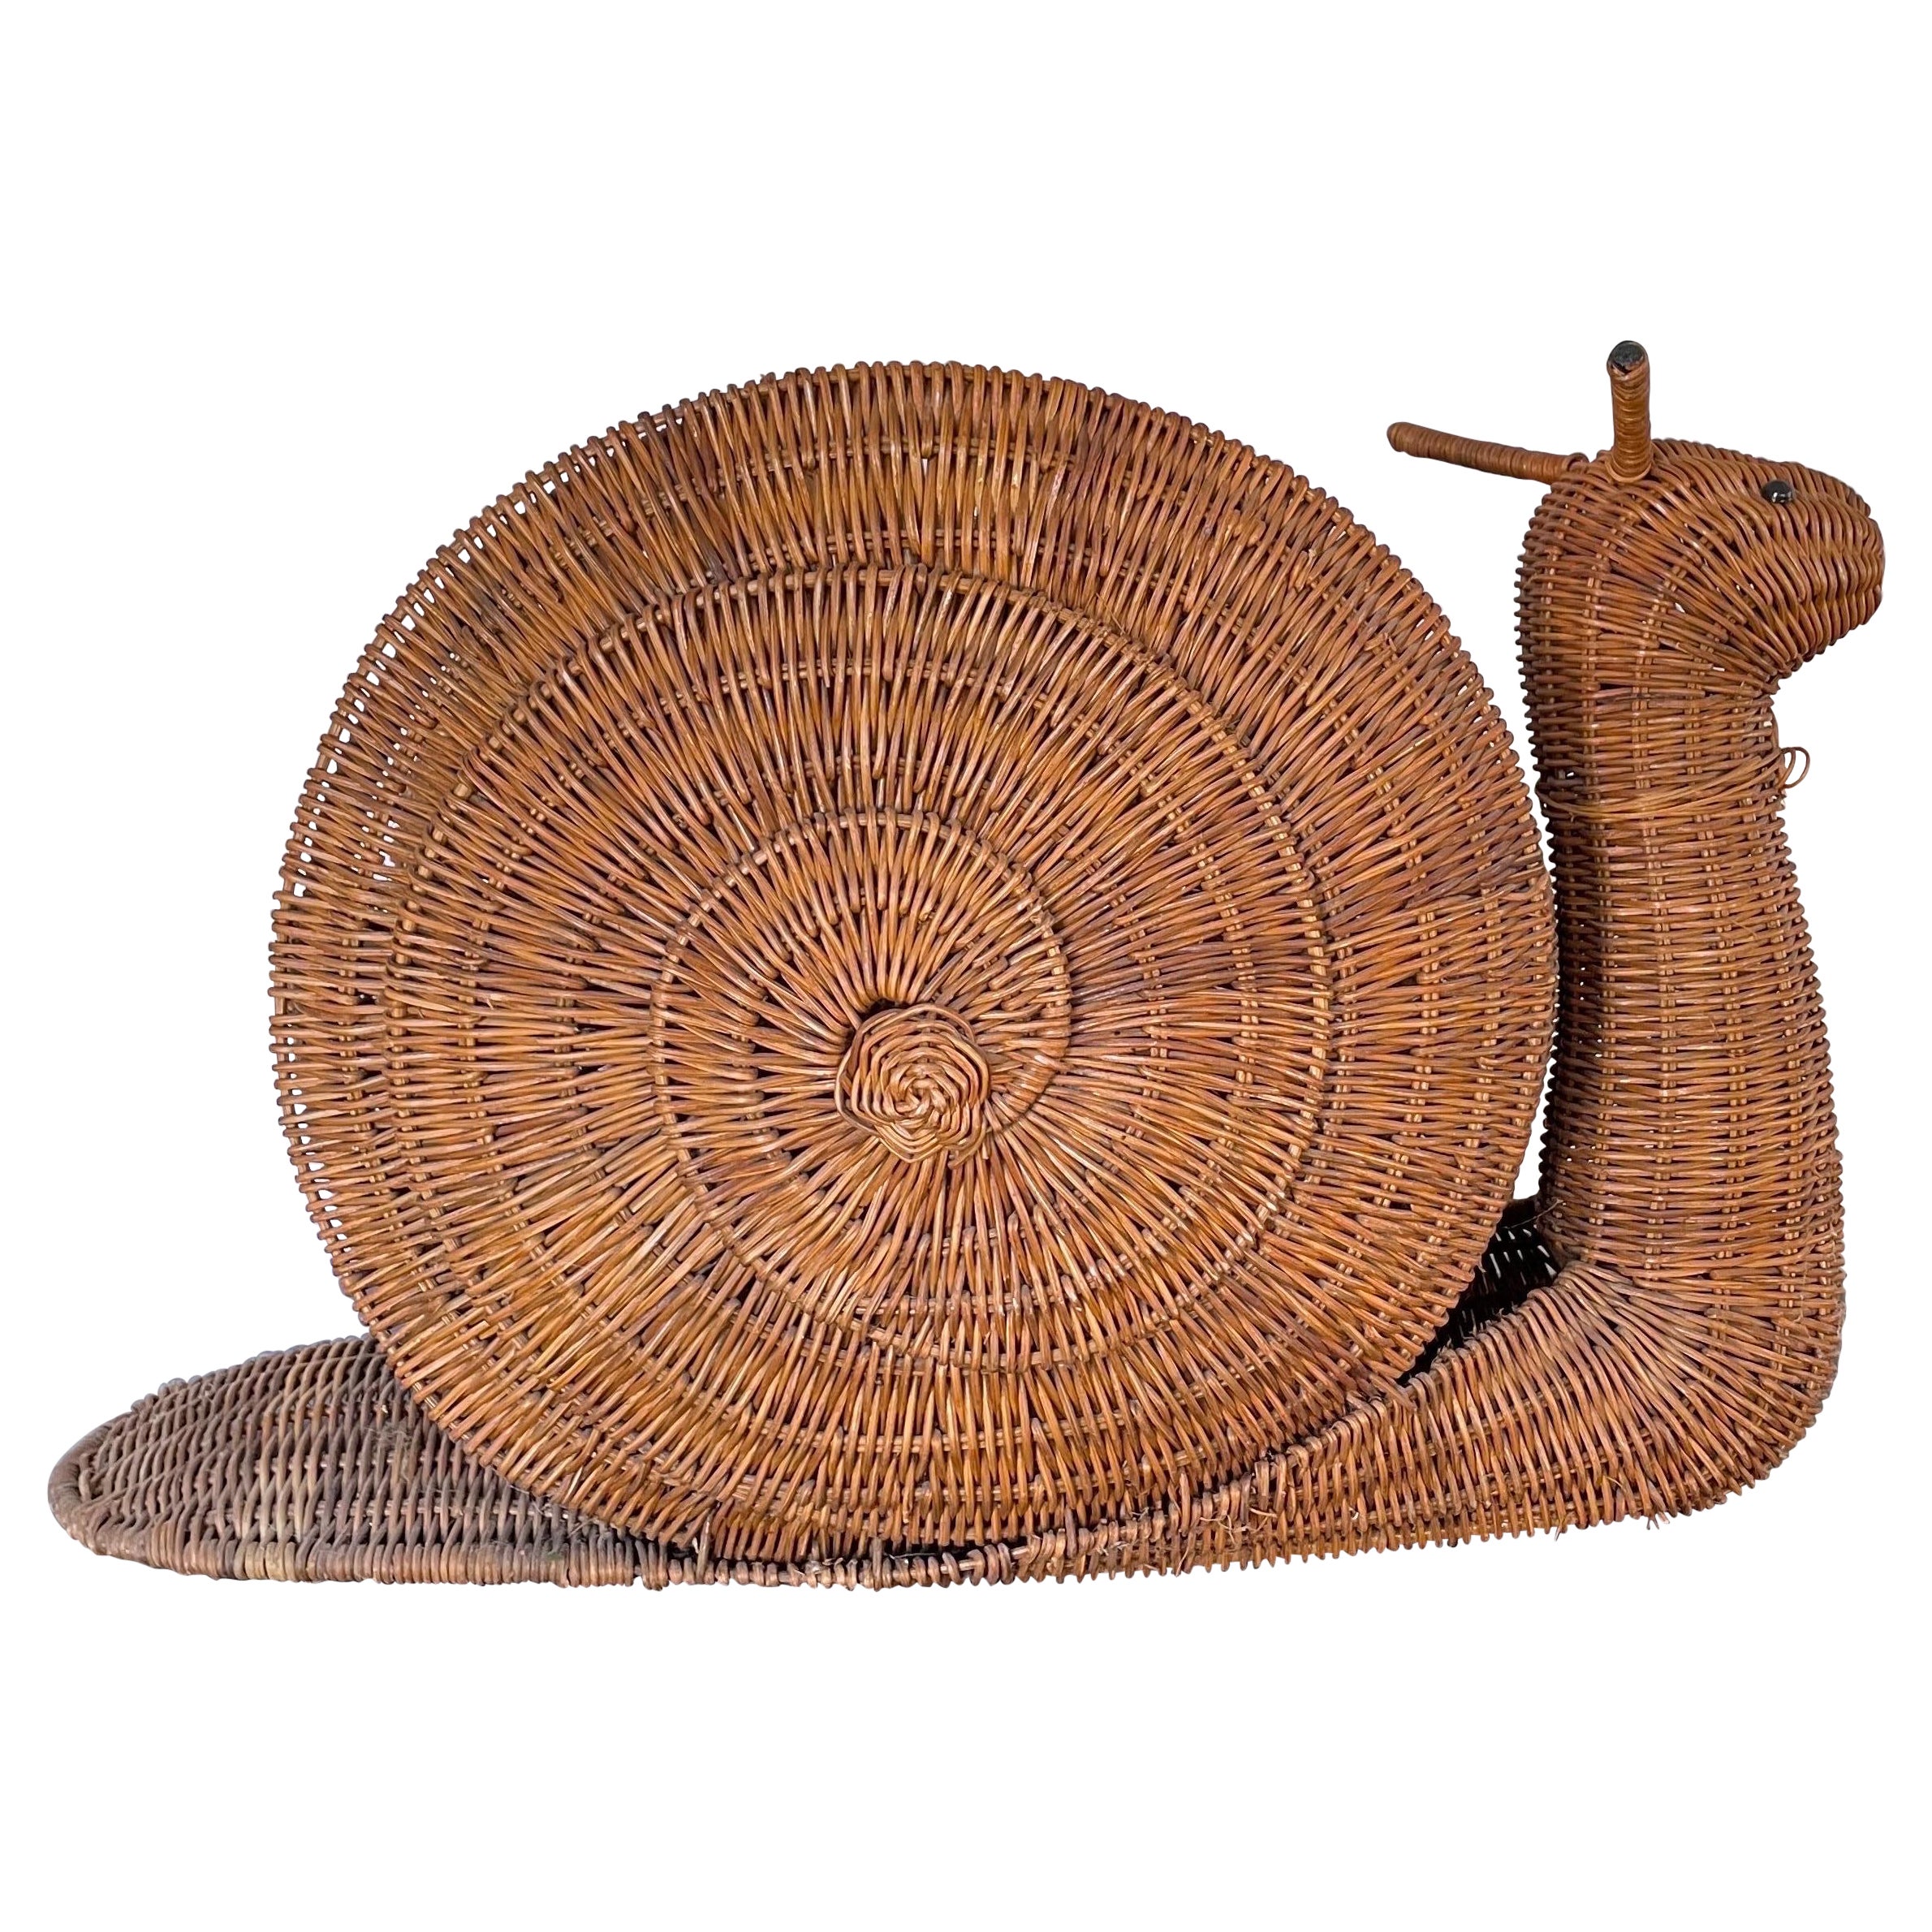 Charming Mid-Century Wicker Magazine Stand in the Shape of a Snail For Sale